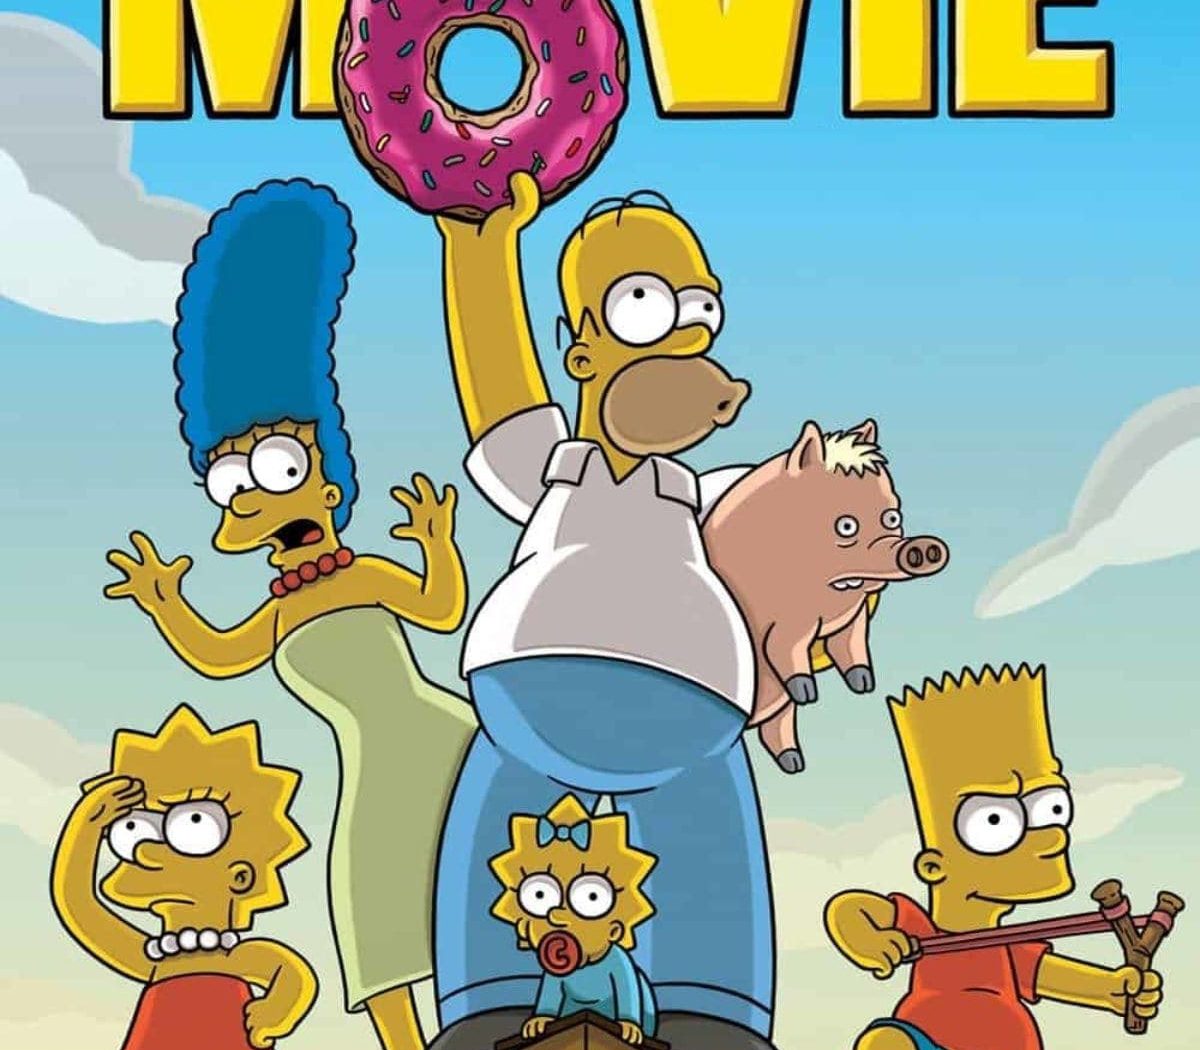 Poster for the movie "The Simpsons Movie"